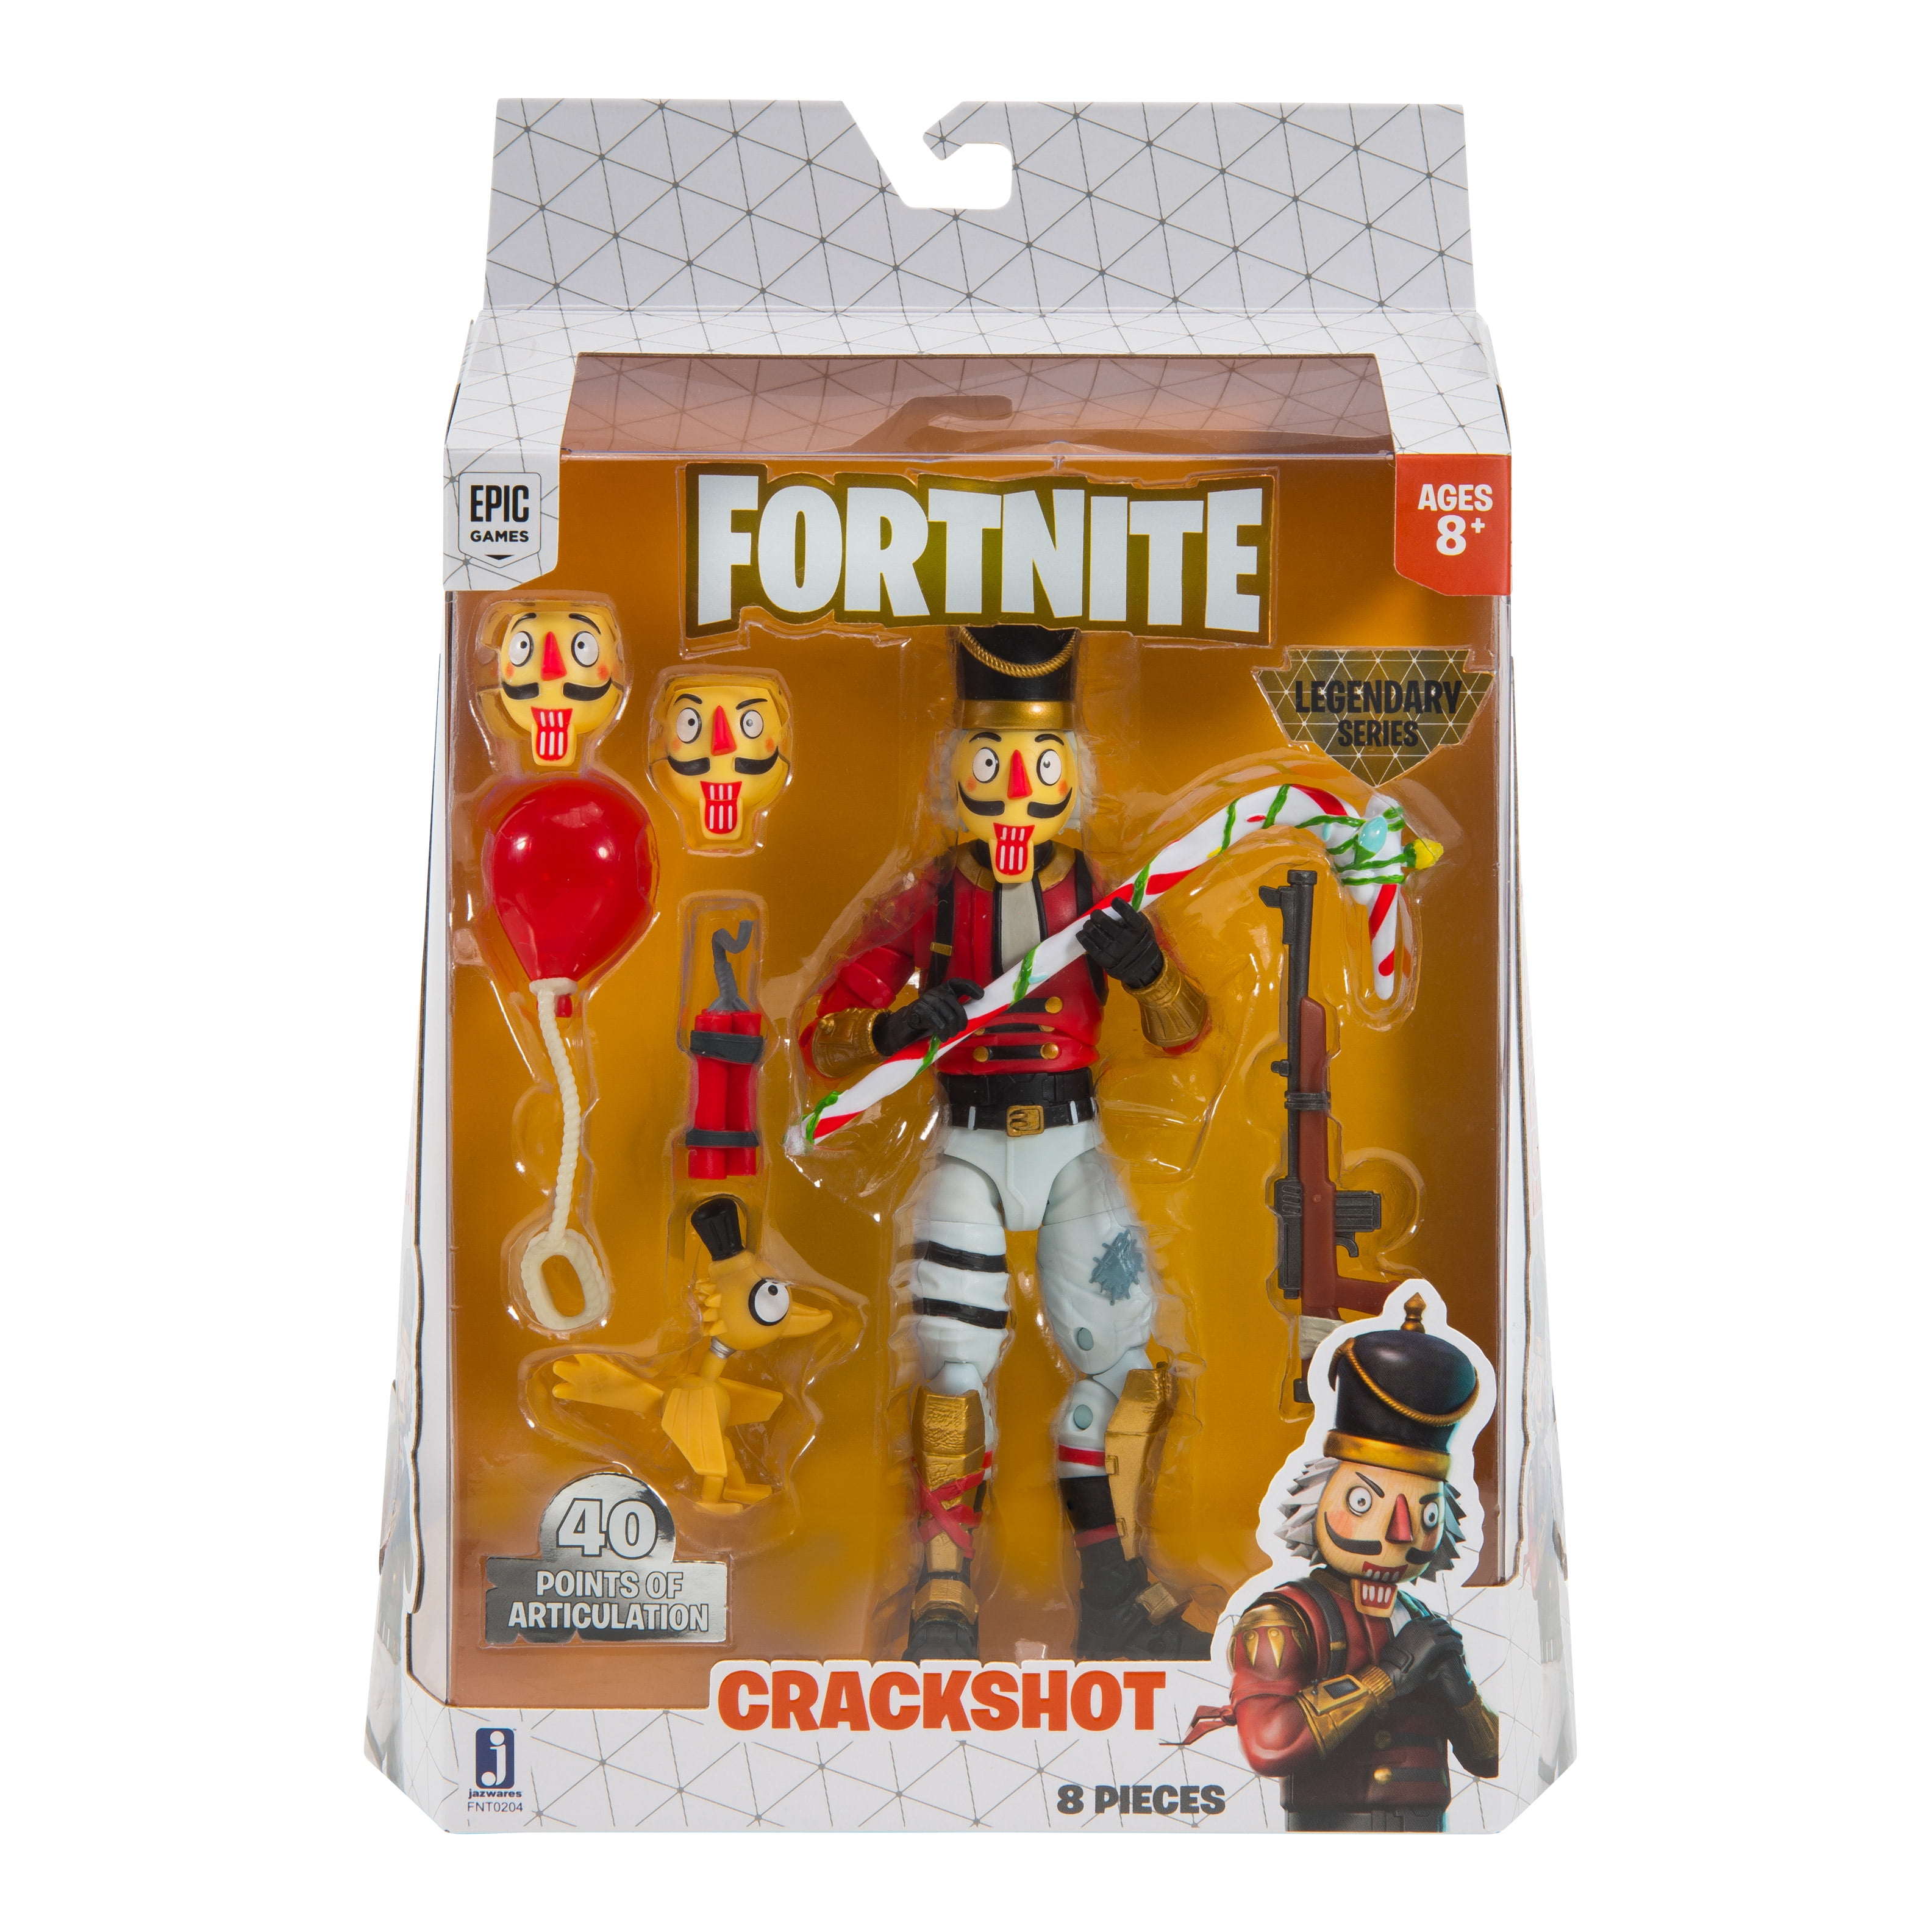 Fortnite Legendary Series Tomatohead 6inch Action Figure Jazwares Epic Games for sale online 